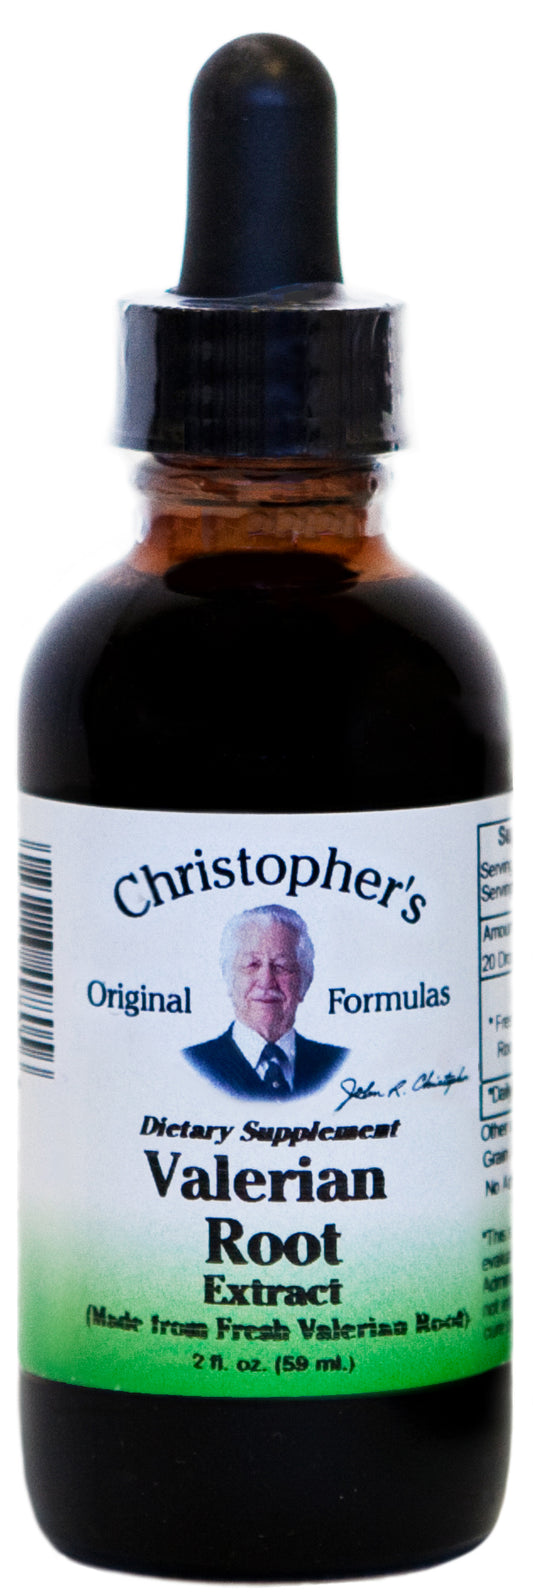 Dr. Christopher's Fresh Valerian Root Glycerine Extract